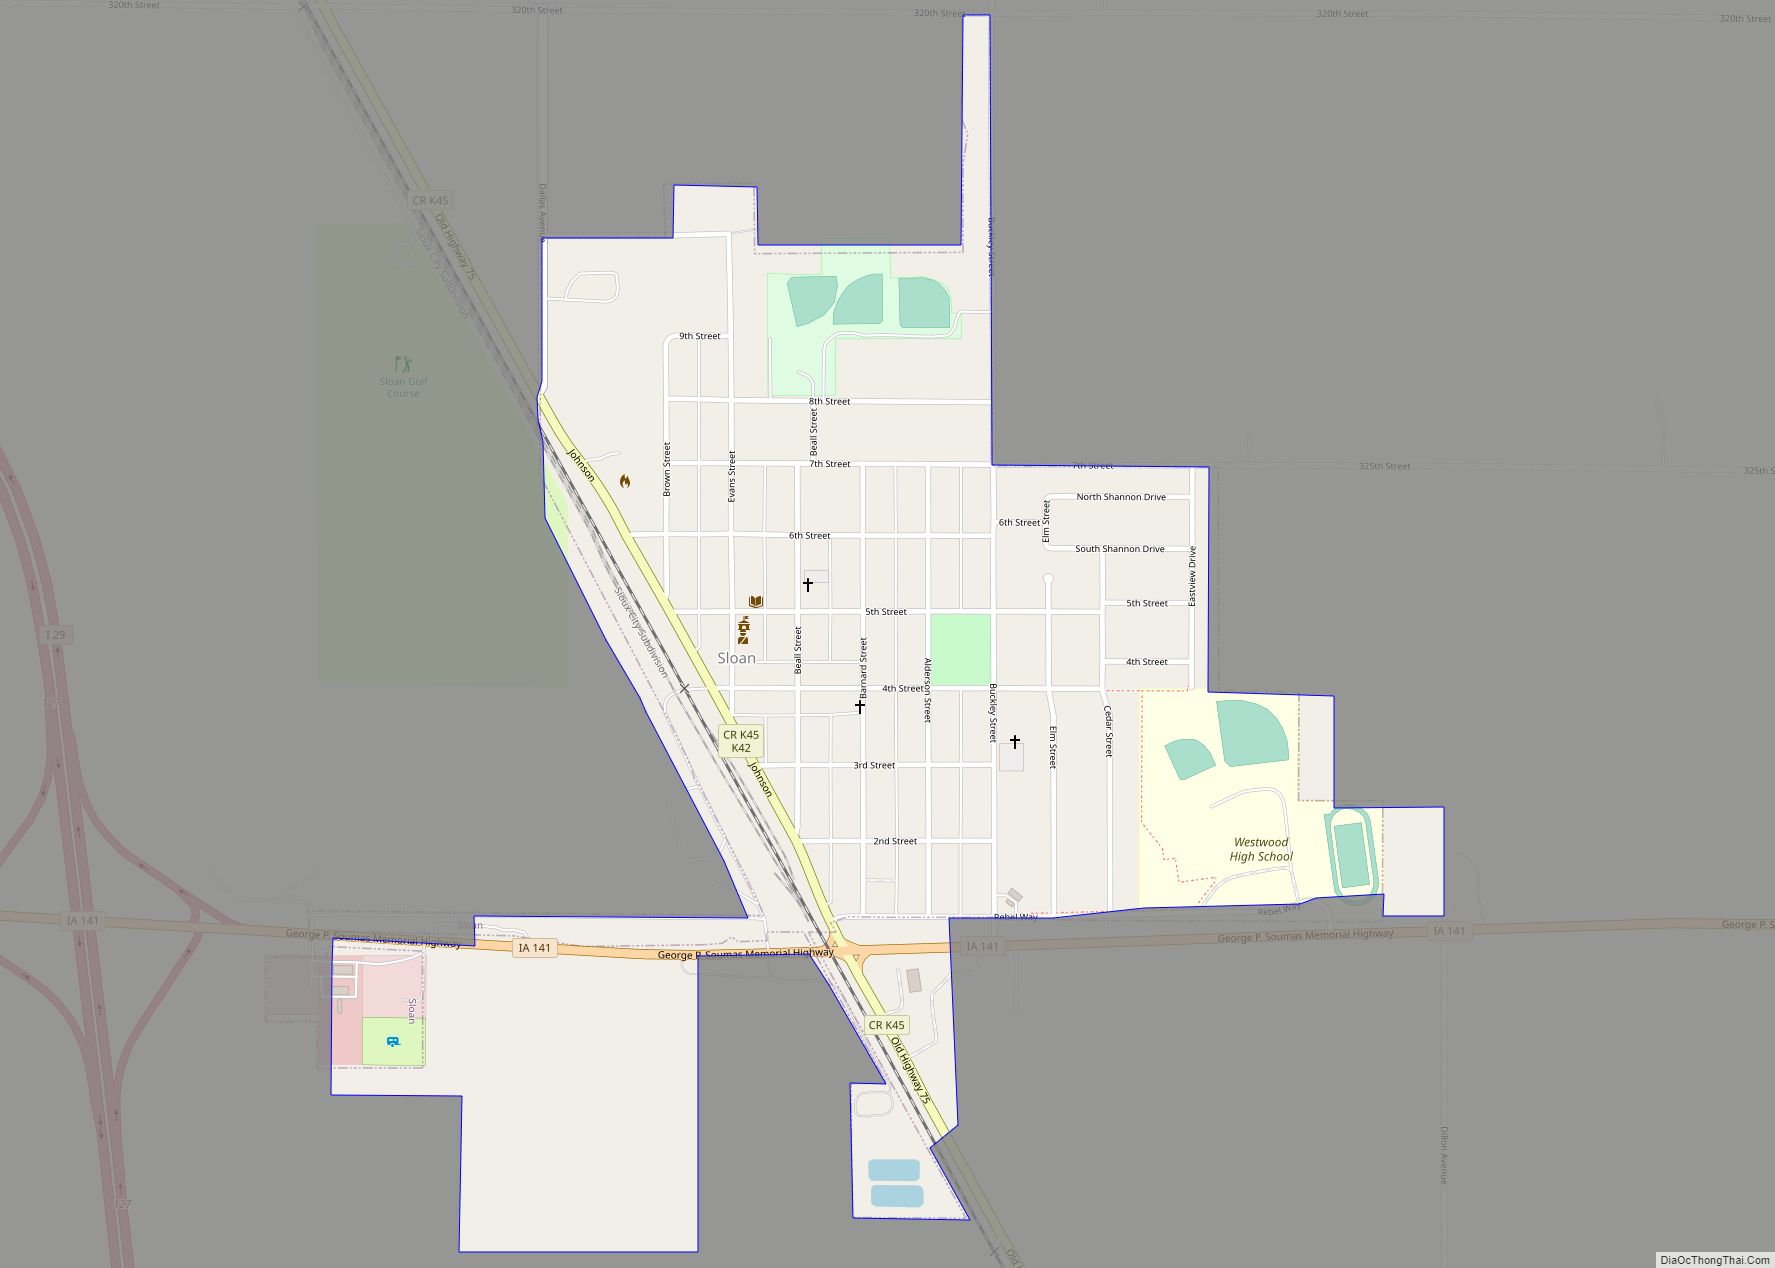 Map of Sloan city